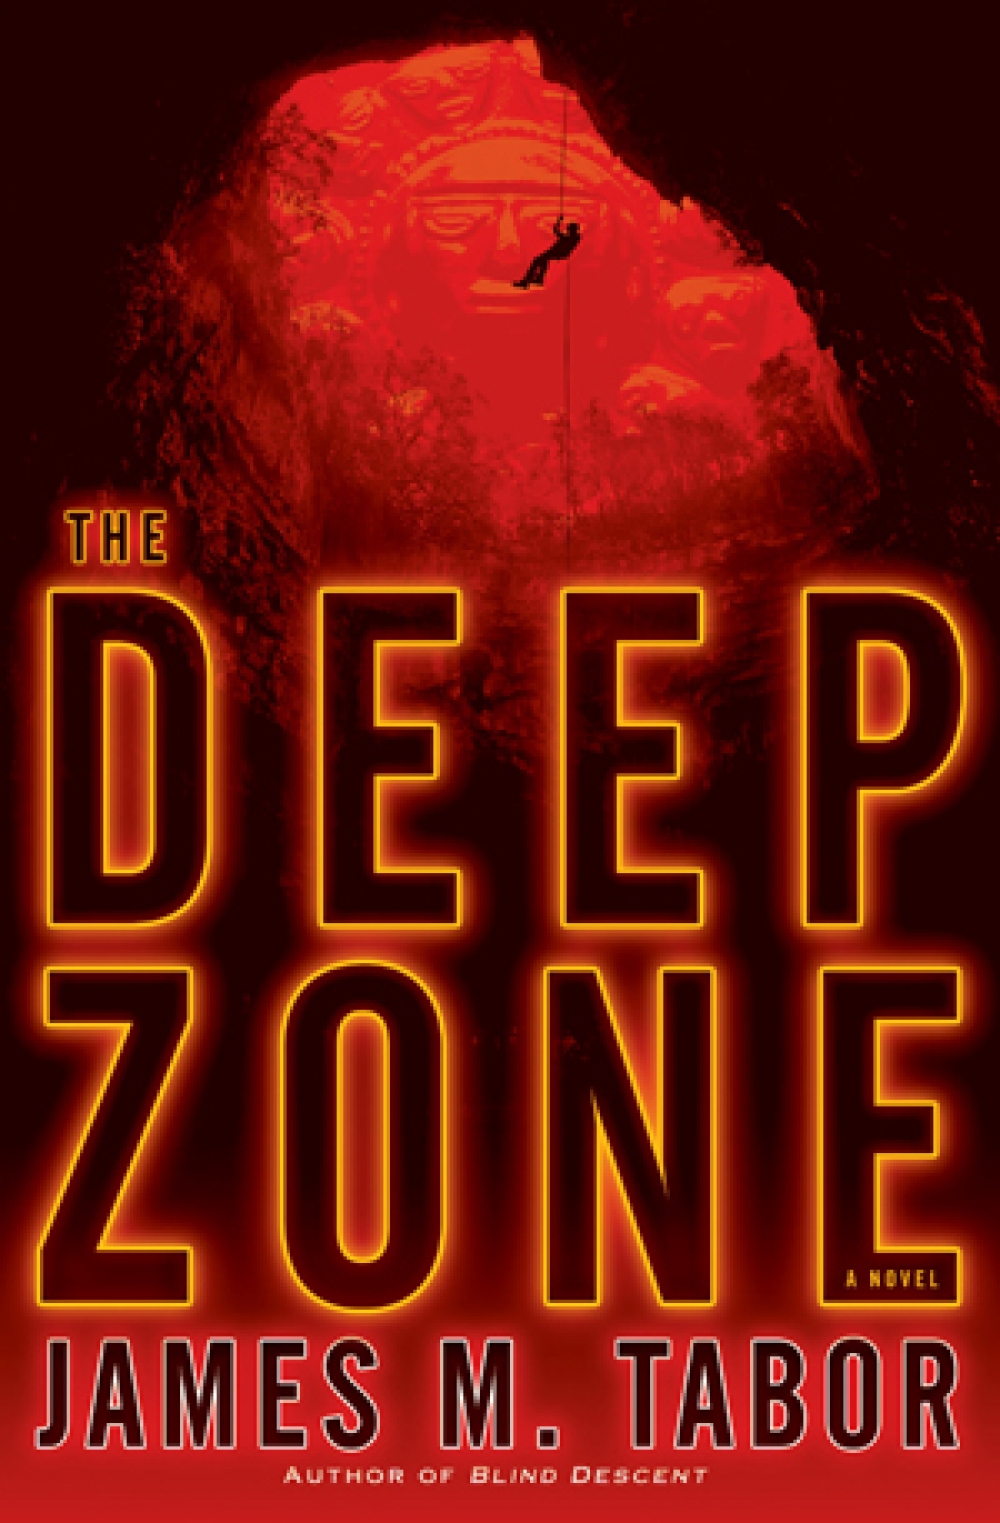 The cover of the book, The Deep Zone, written by James M. Tabor